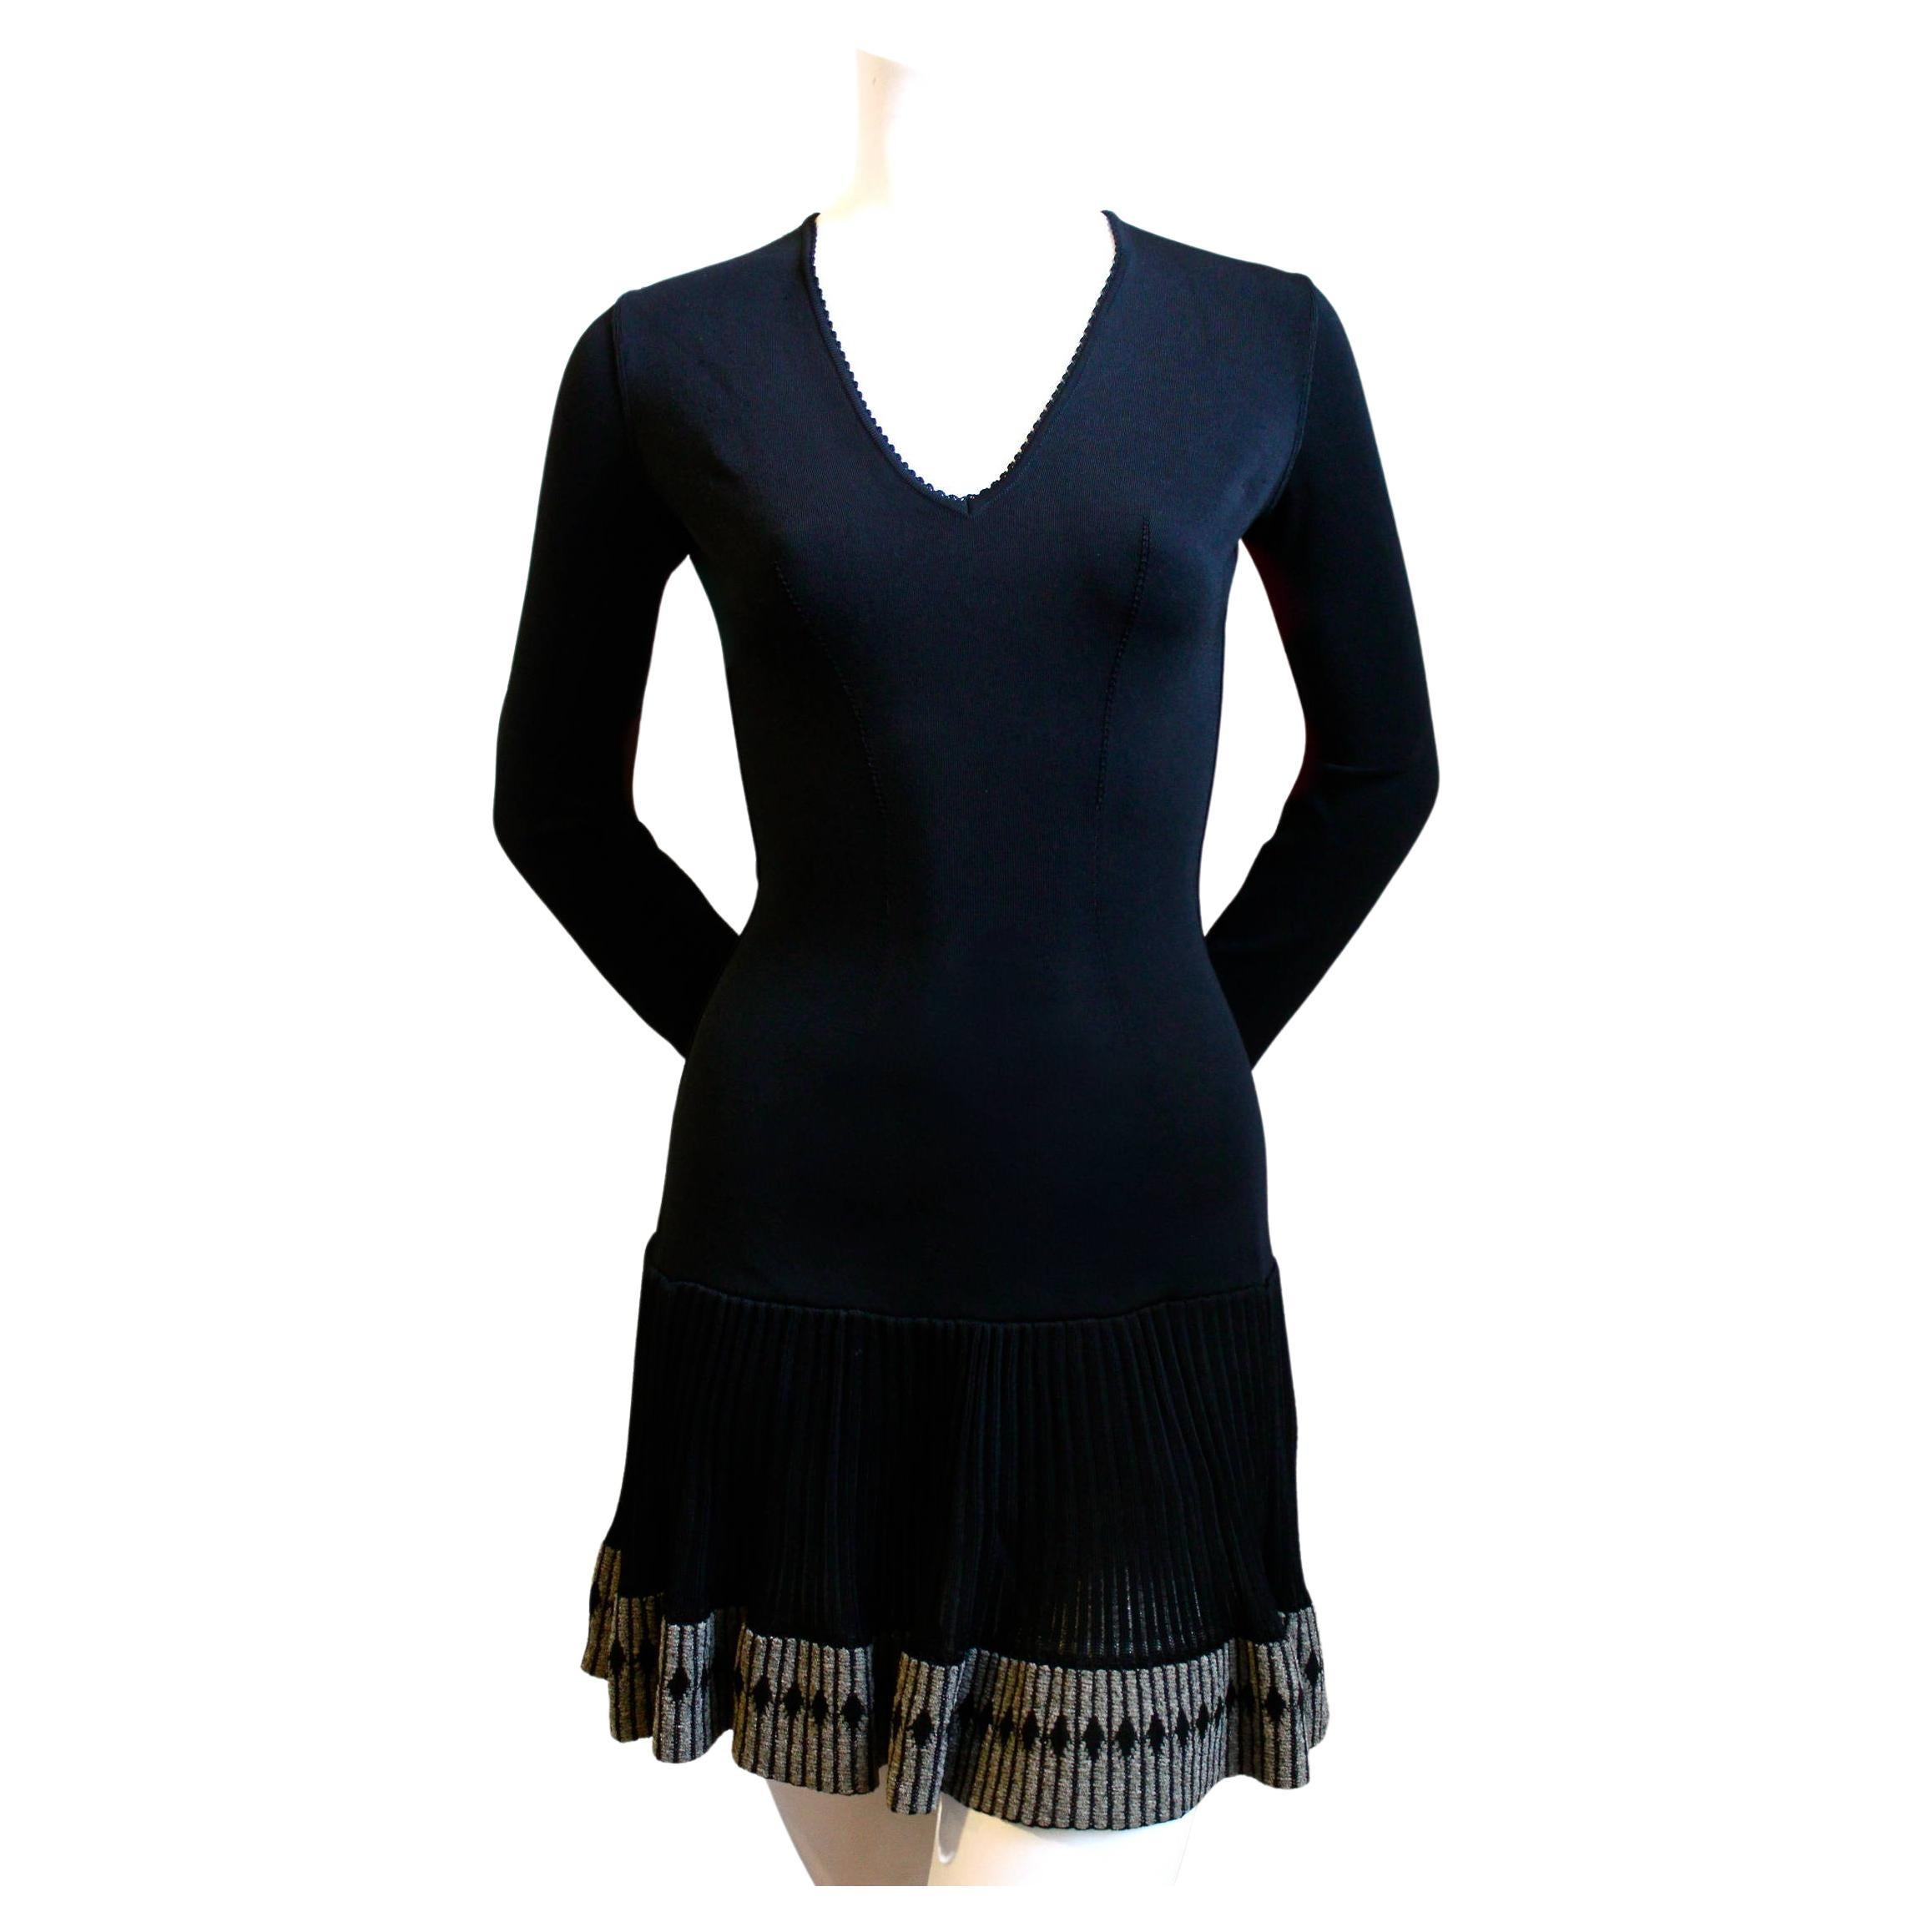 Very rare, jet black knit mini dress with scalloped trim and semi sheer skirt with  decorative diamond embroidered hemline from Azzedine Alaia dating to the early 1990's, Dress is labeled a size S. Zips up back with bodysuit for modesty (snap